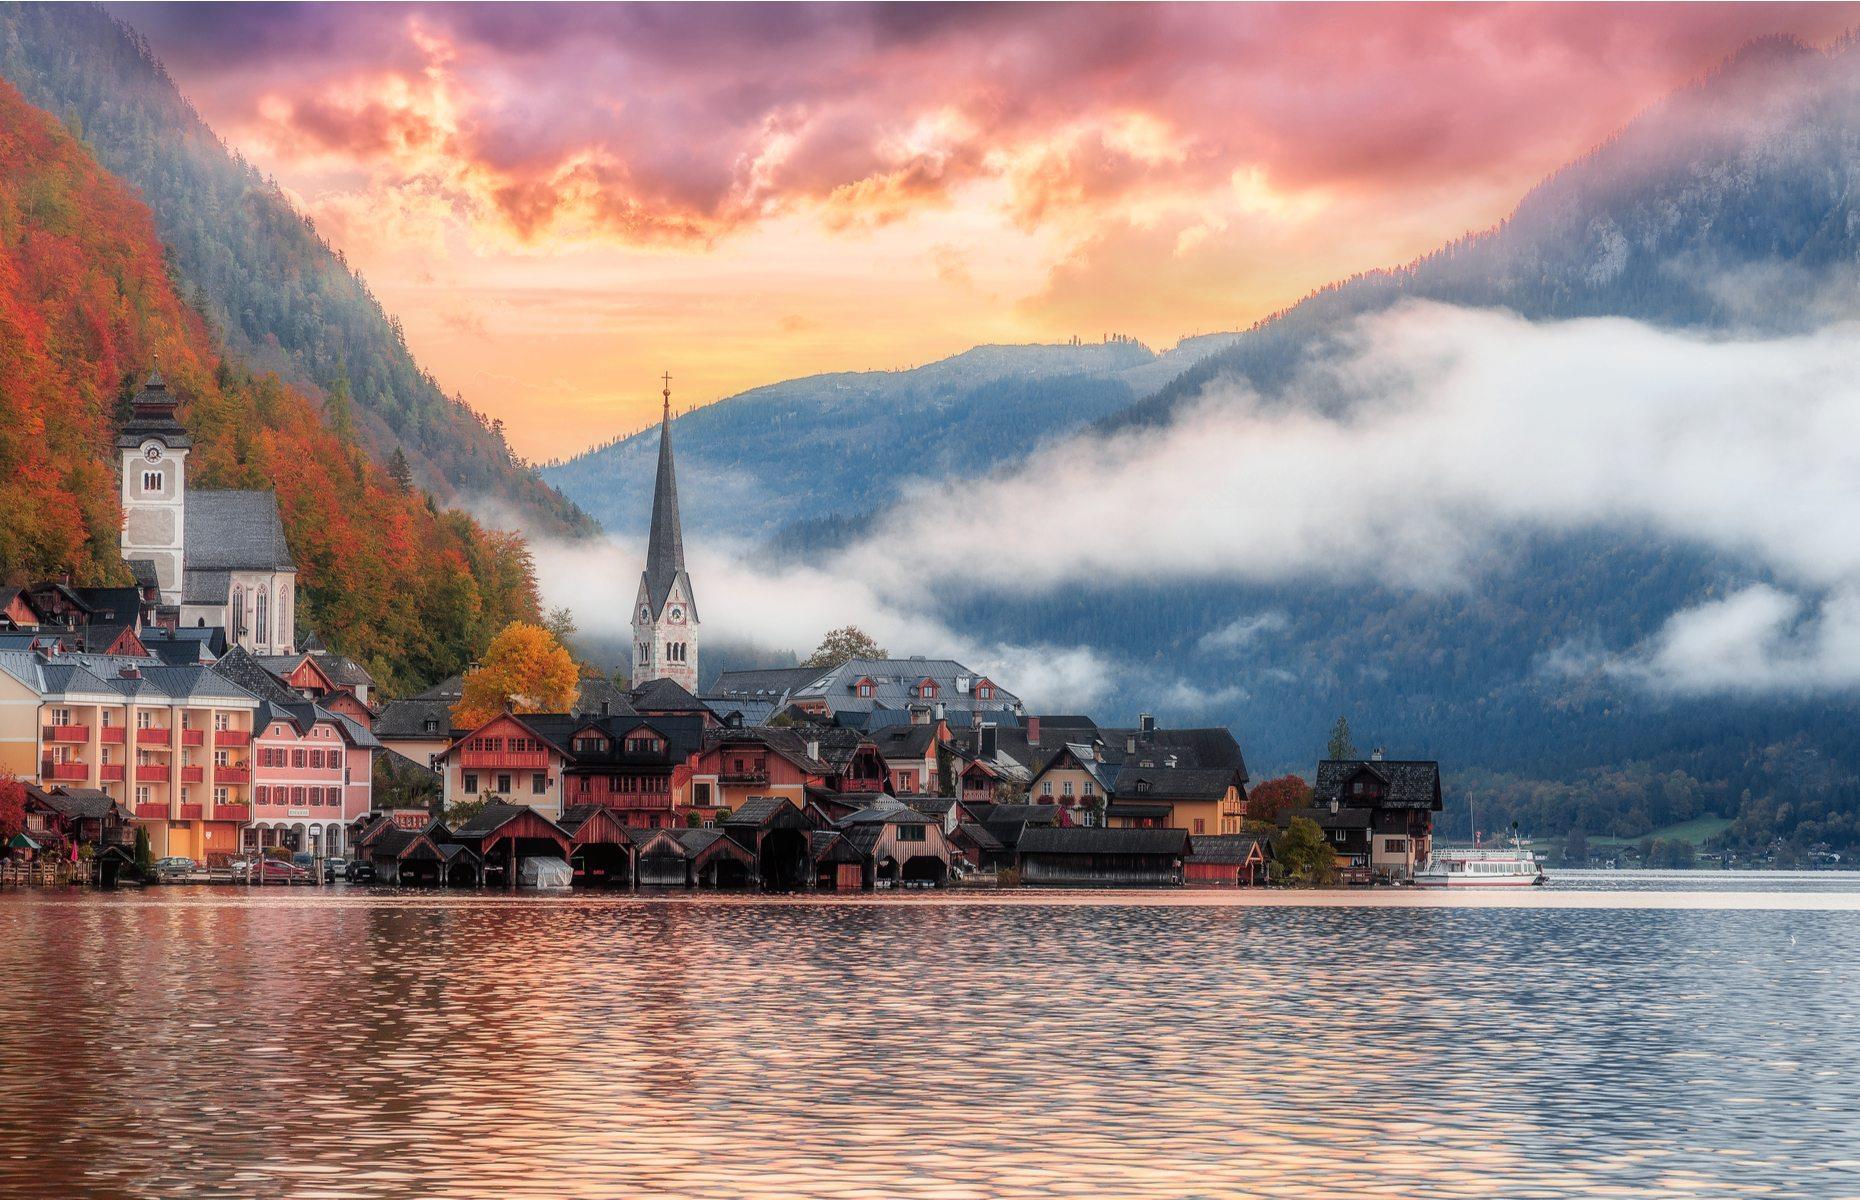 Looking postcard-perfect in this sunset shot, Hallstatt’s cluster of pastel-colored buildings are hugged by peaks and encircled by low-lying clouds. Located in the mountainous Salzkammergut region, Hallstatt’s long history began with the discovery of salt mines in the region in prehistoric times – possibly as early as 4000 BC. Today, much of the architecture dates back to the 16th century, with the buildings painted in an array of ice-cream hues.